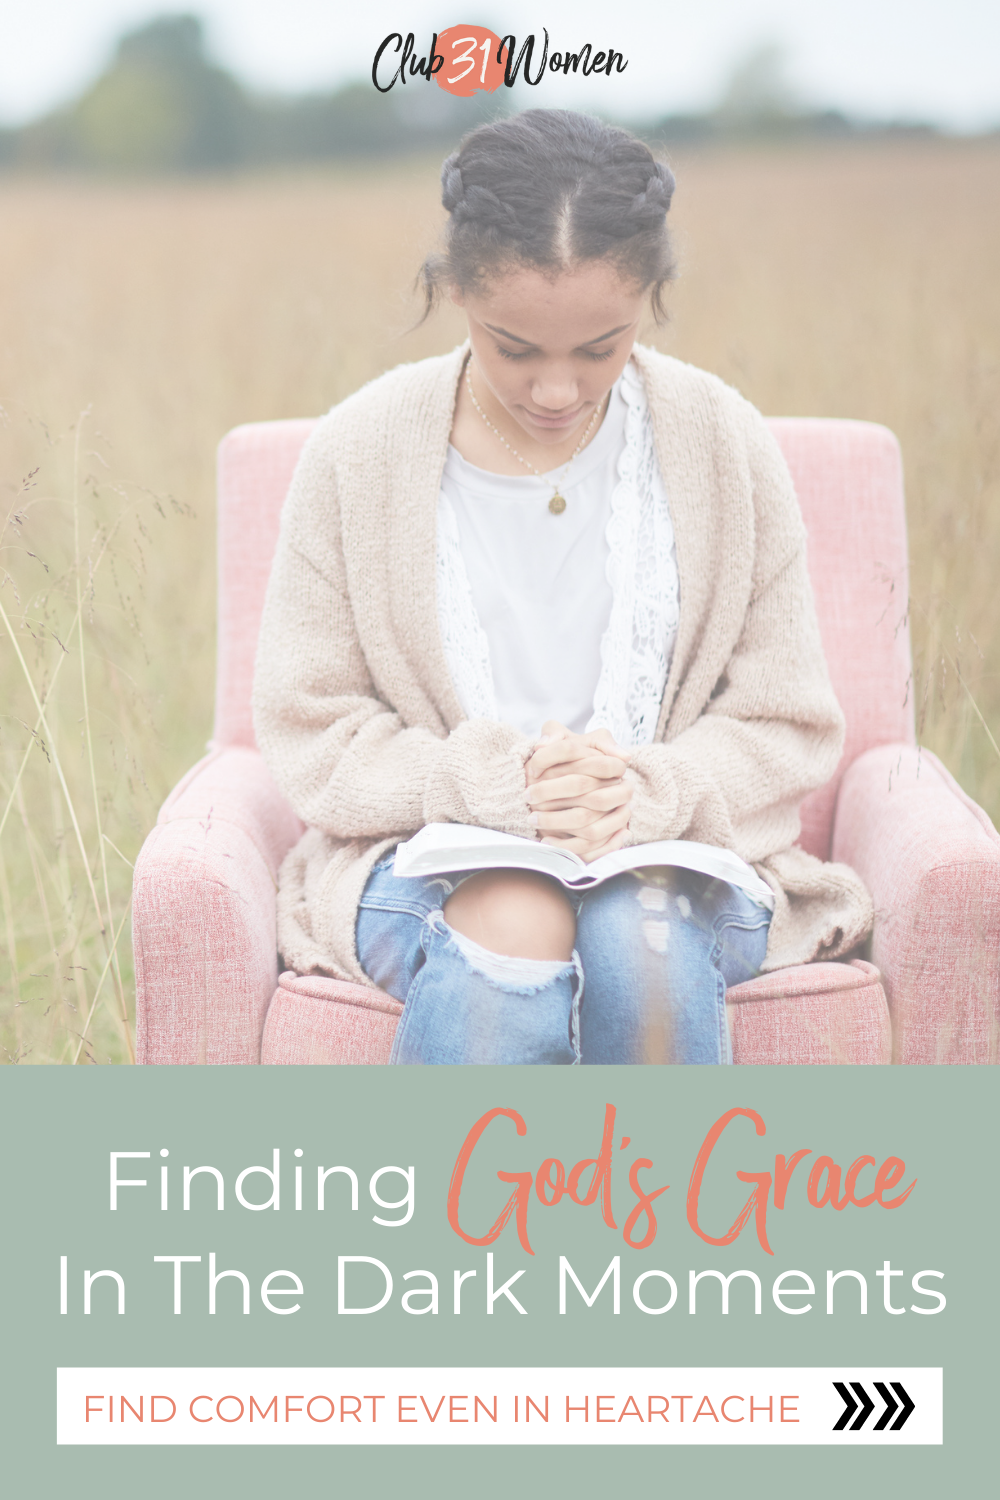 The grace of God is the greatest gift we can ever accept in this world and we don't realize how much we need it until we find ourselves broken. via @Club31Women